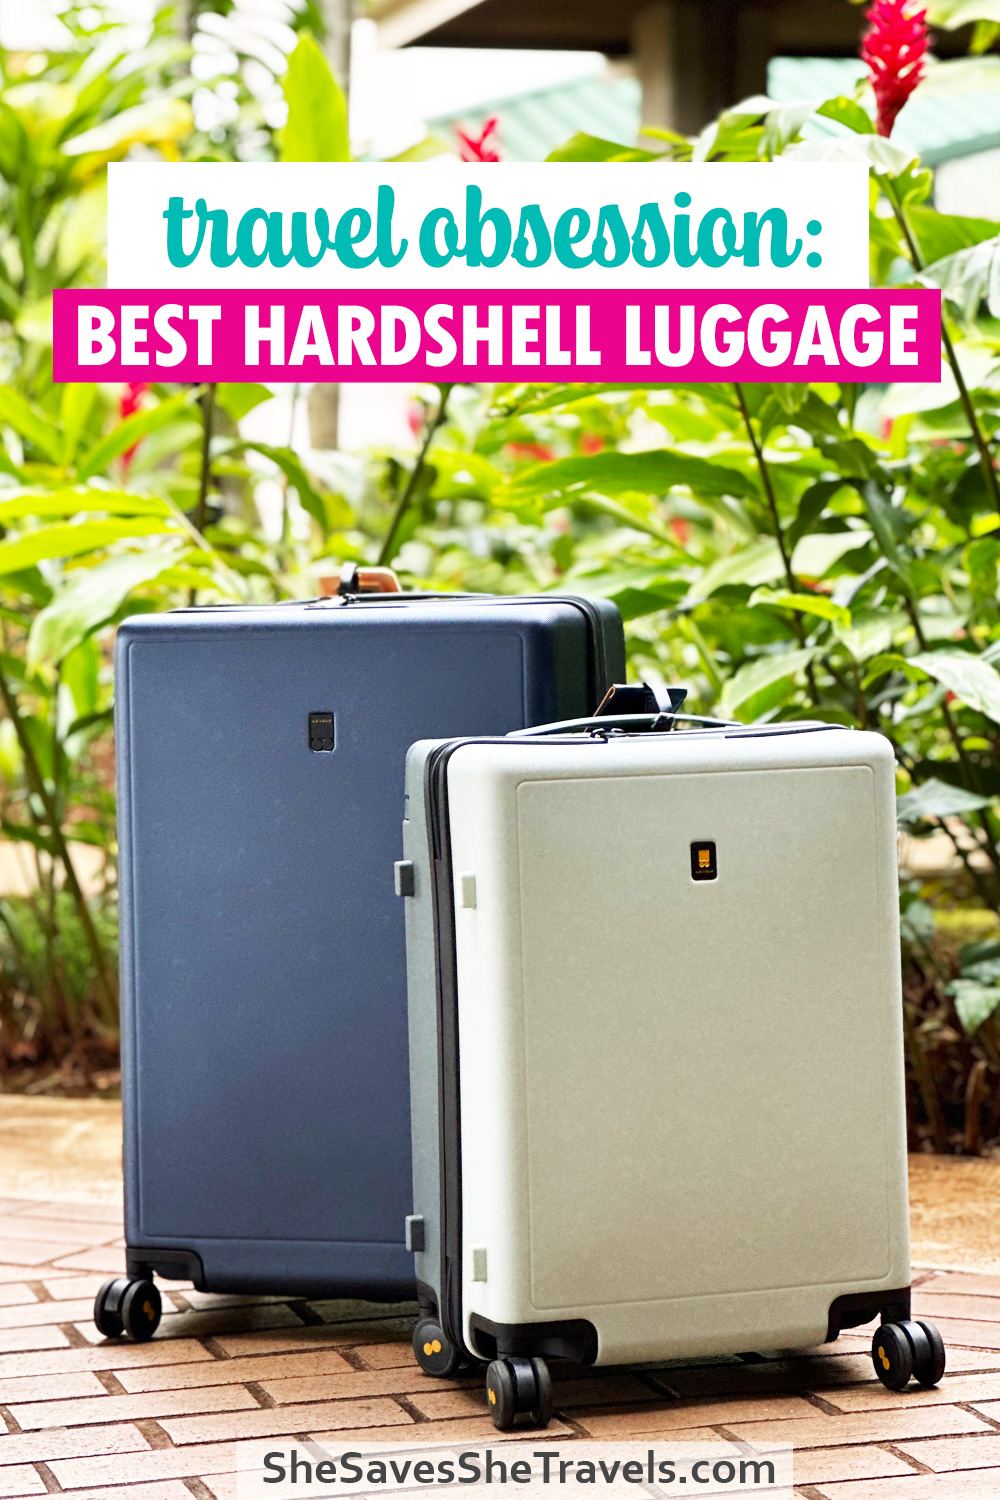 two level8 suitcases with text that reads travel obsession: best hardshell luggage